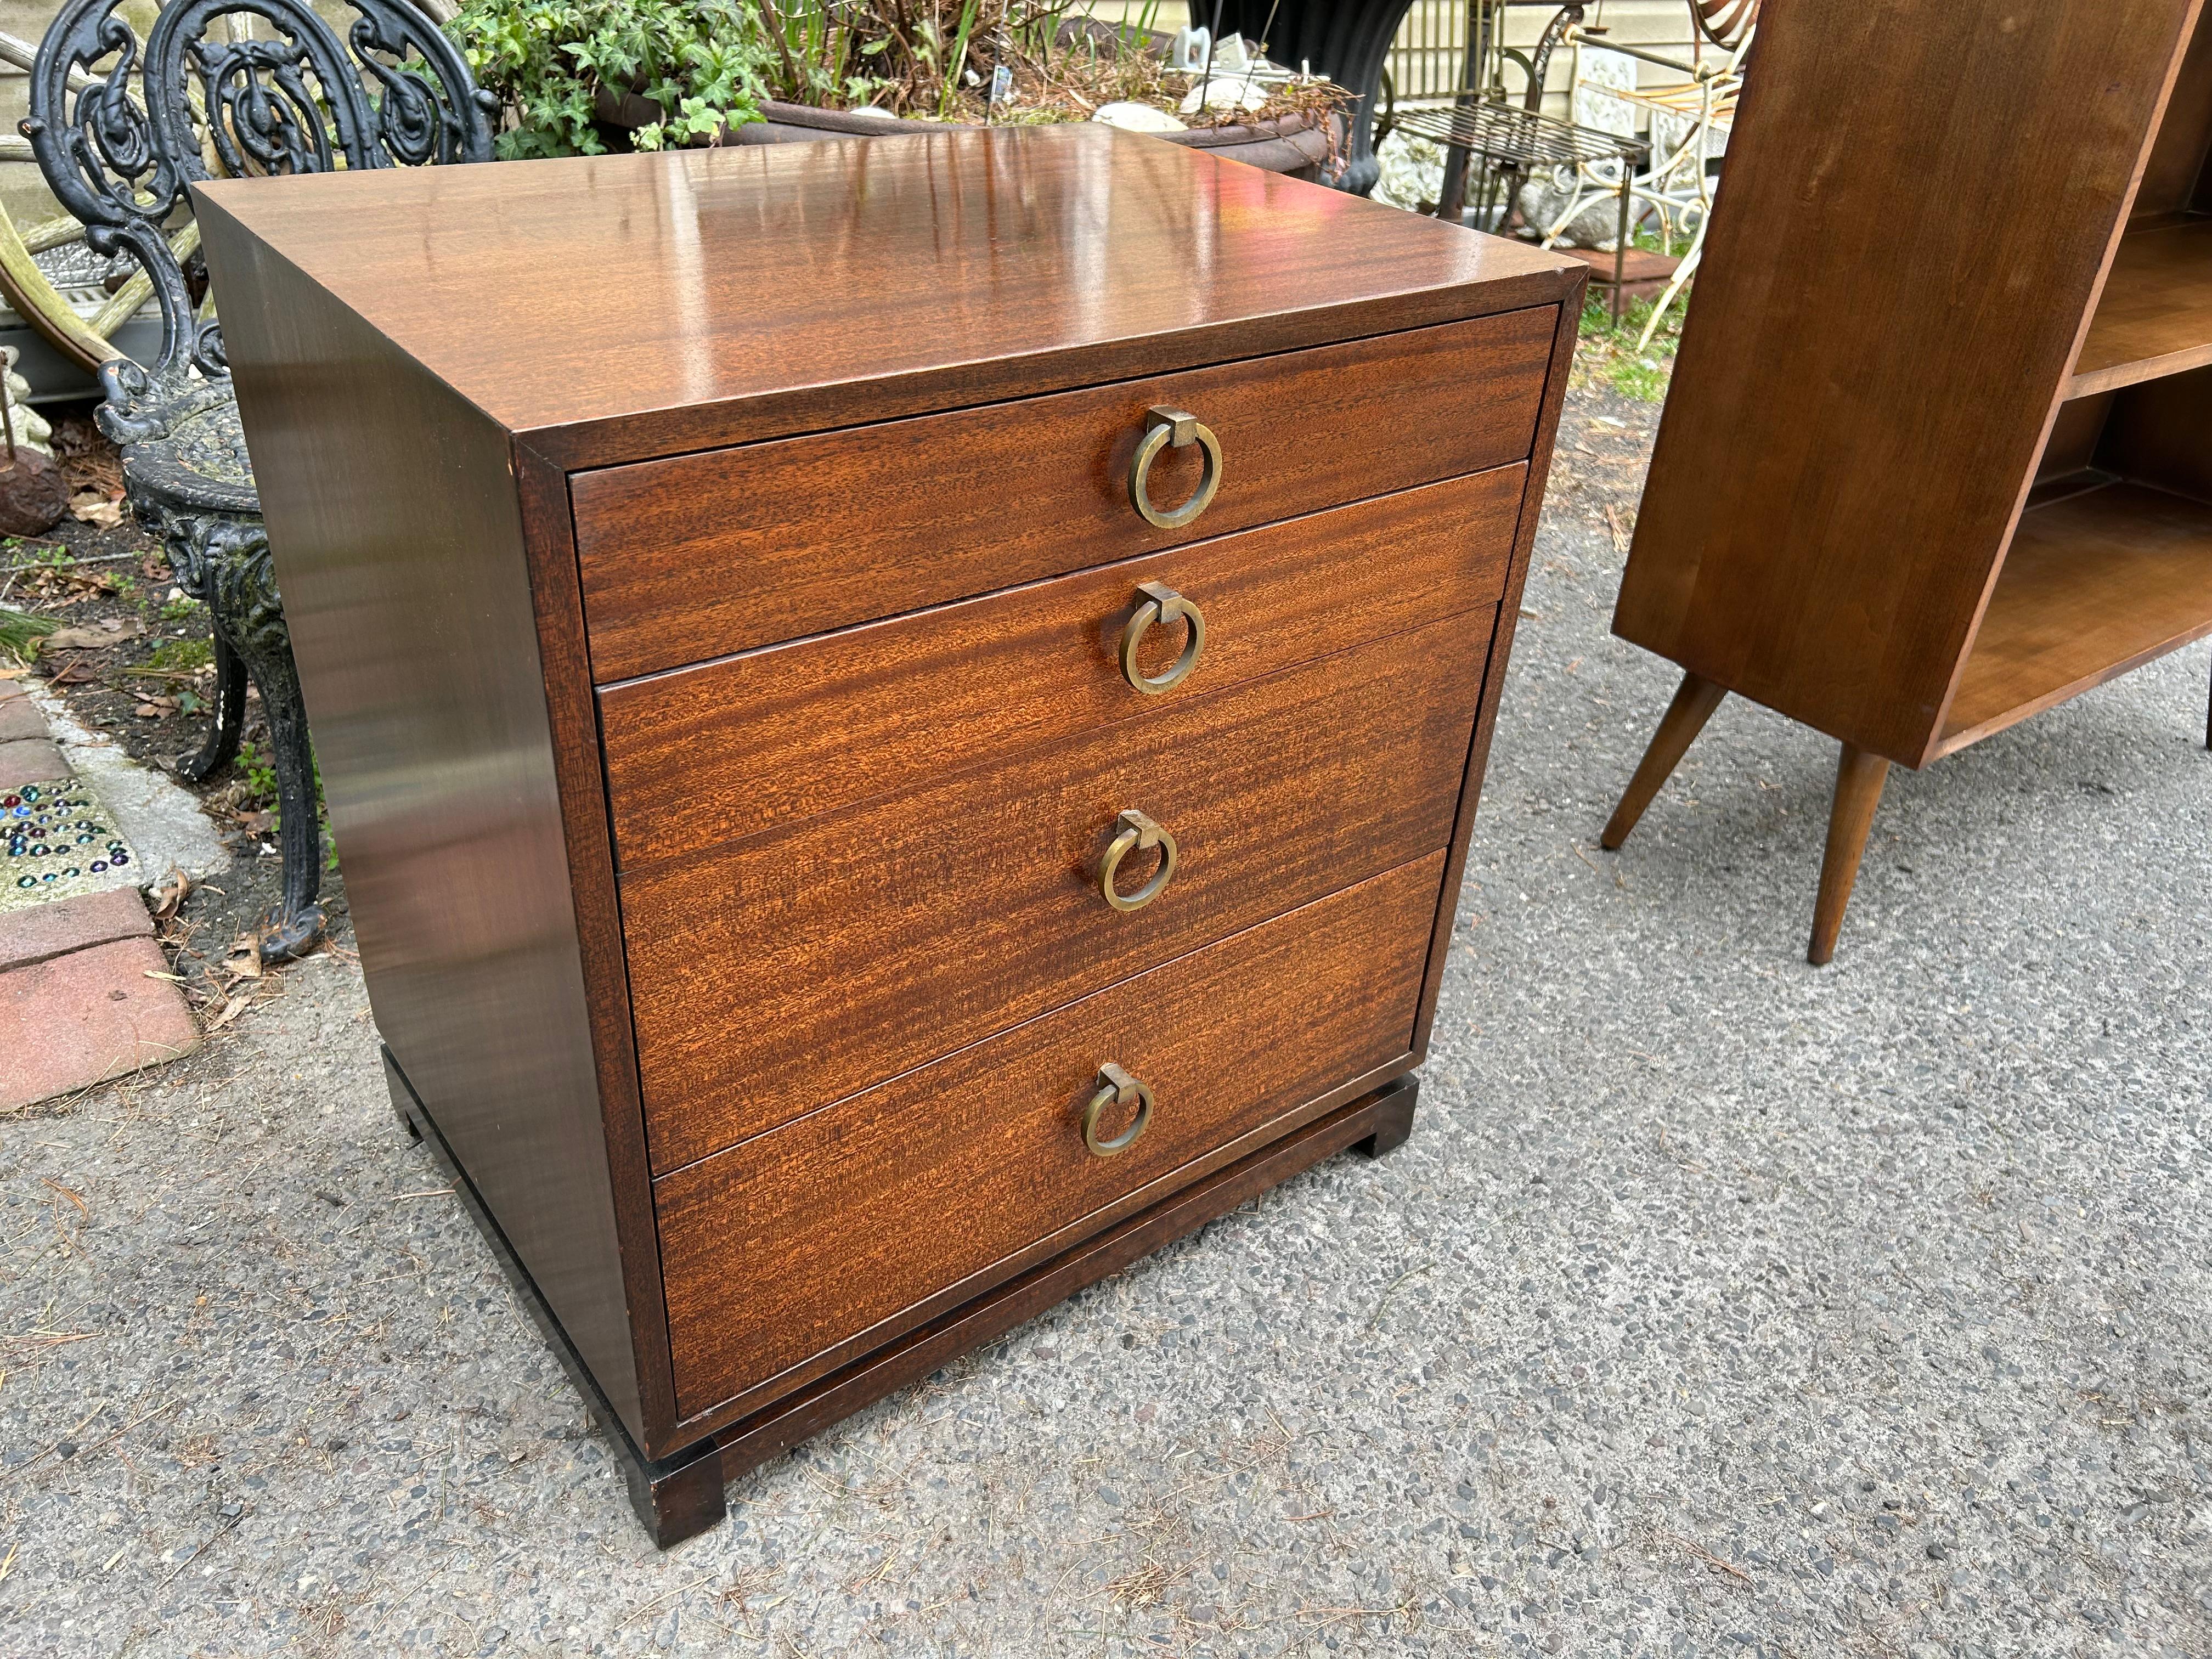 Handsome Harvey Probber small chest or night stand with Brass ring pulls.  This chest measures 25.5